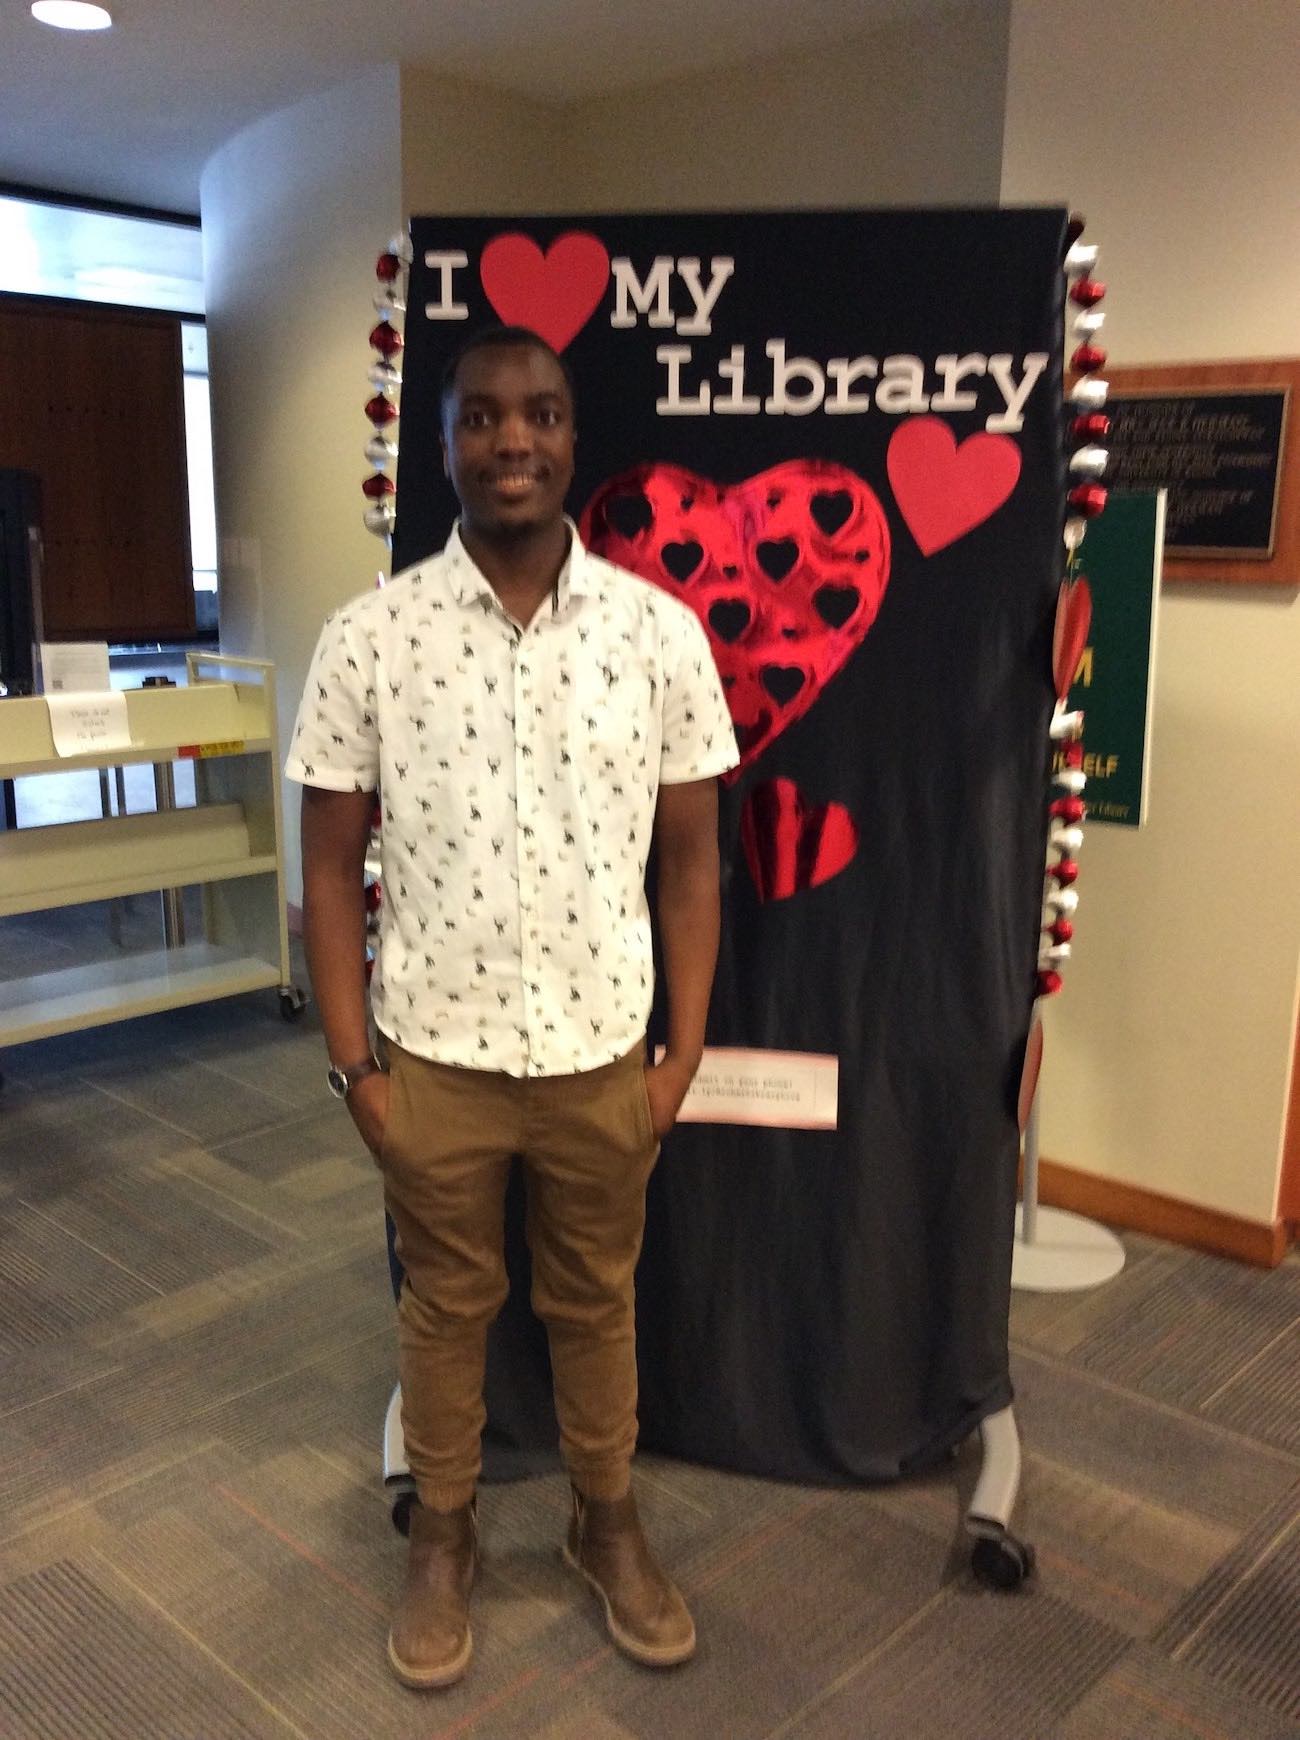 A smiling student with his hands in his pockets stands in front of the I love my library backdrop